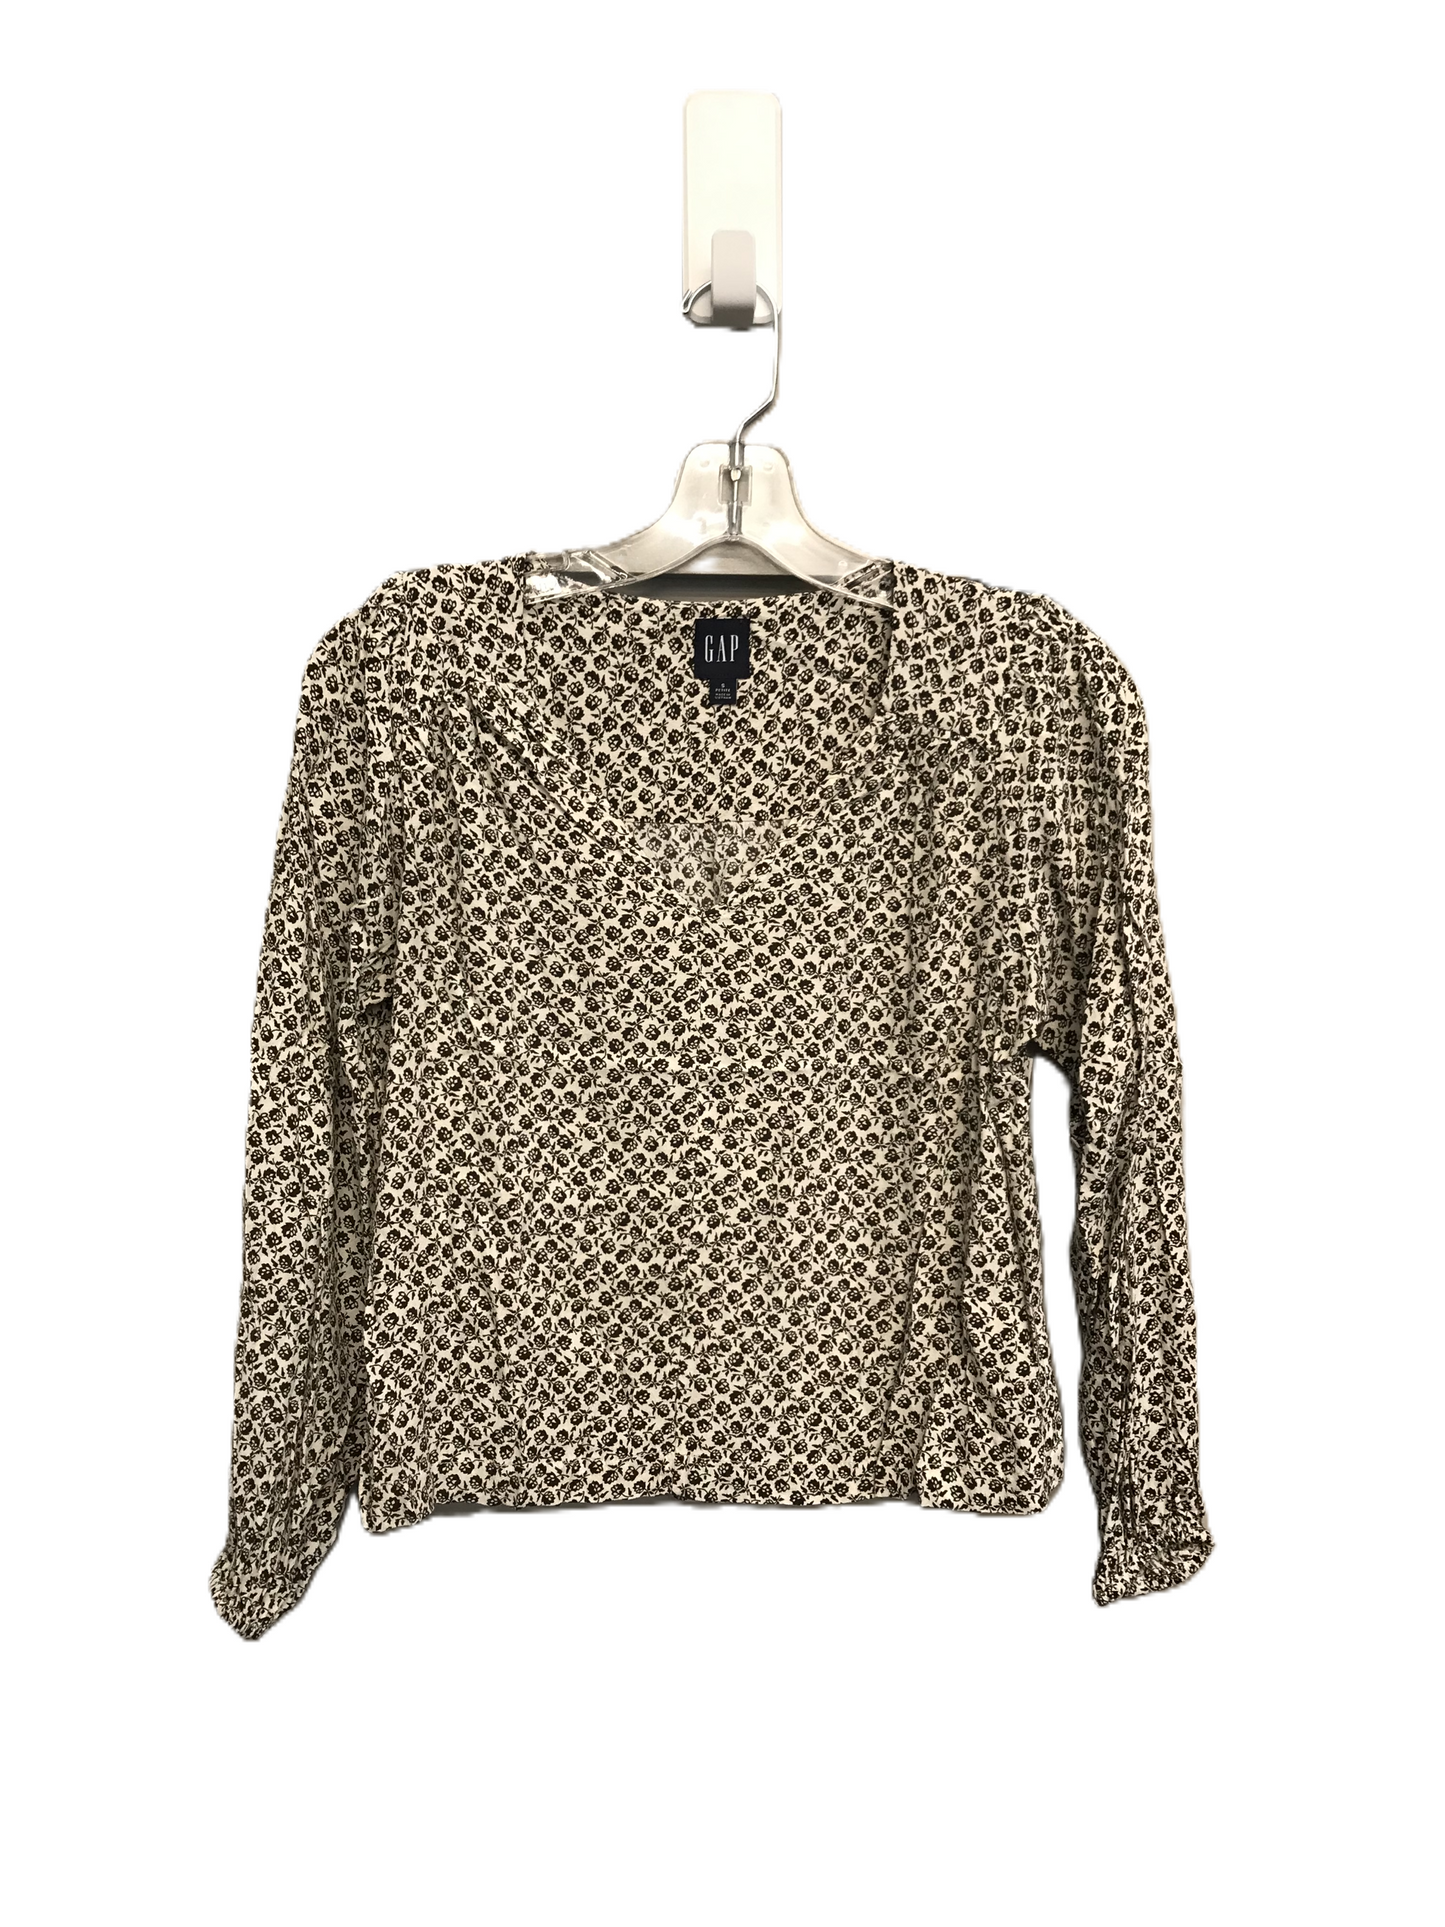 Brown & White Top Long Sleeve By Gap, Size: S